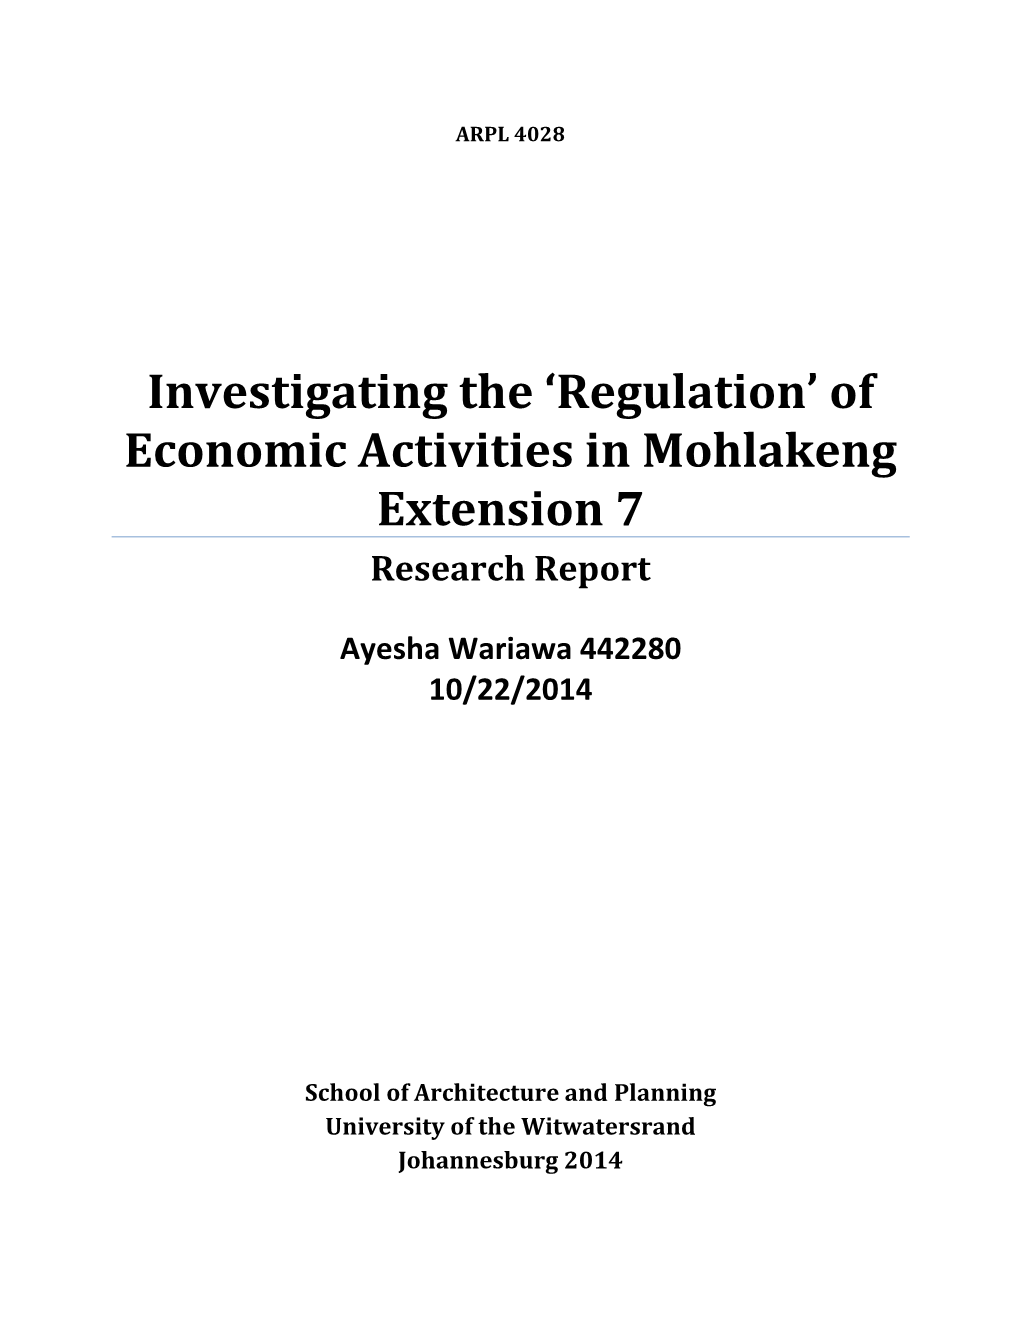 Of Economic Activities in Mohlakeng Extension 7 Research Report